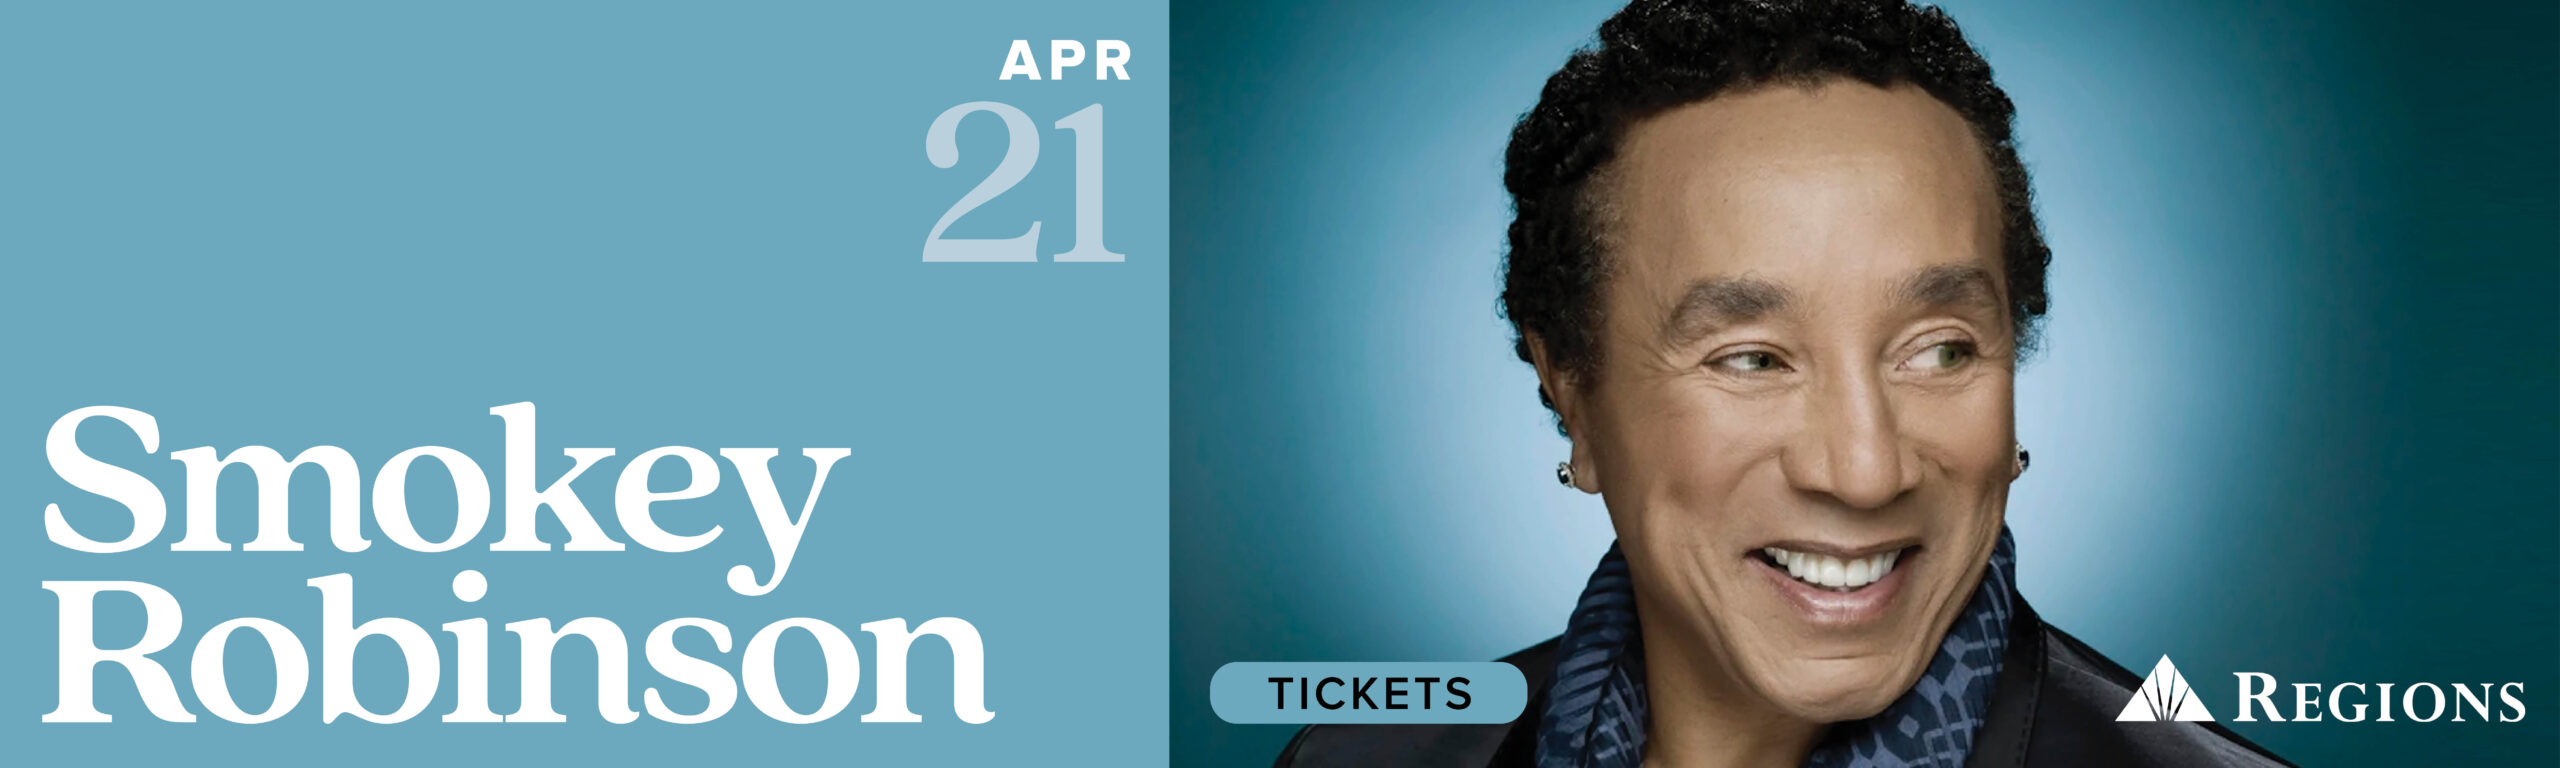 Get your tickets now for the legendary Smokey Robinson, April 21!